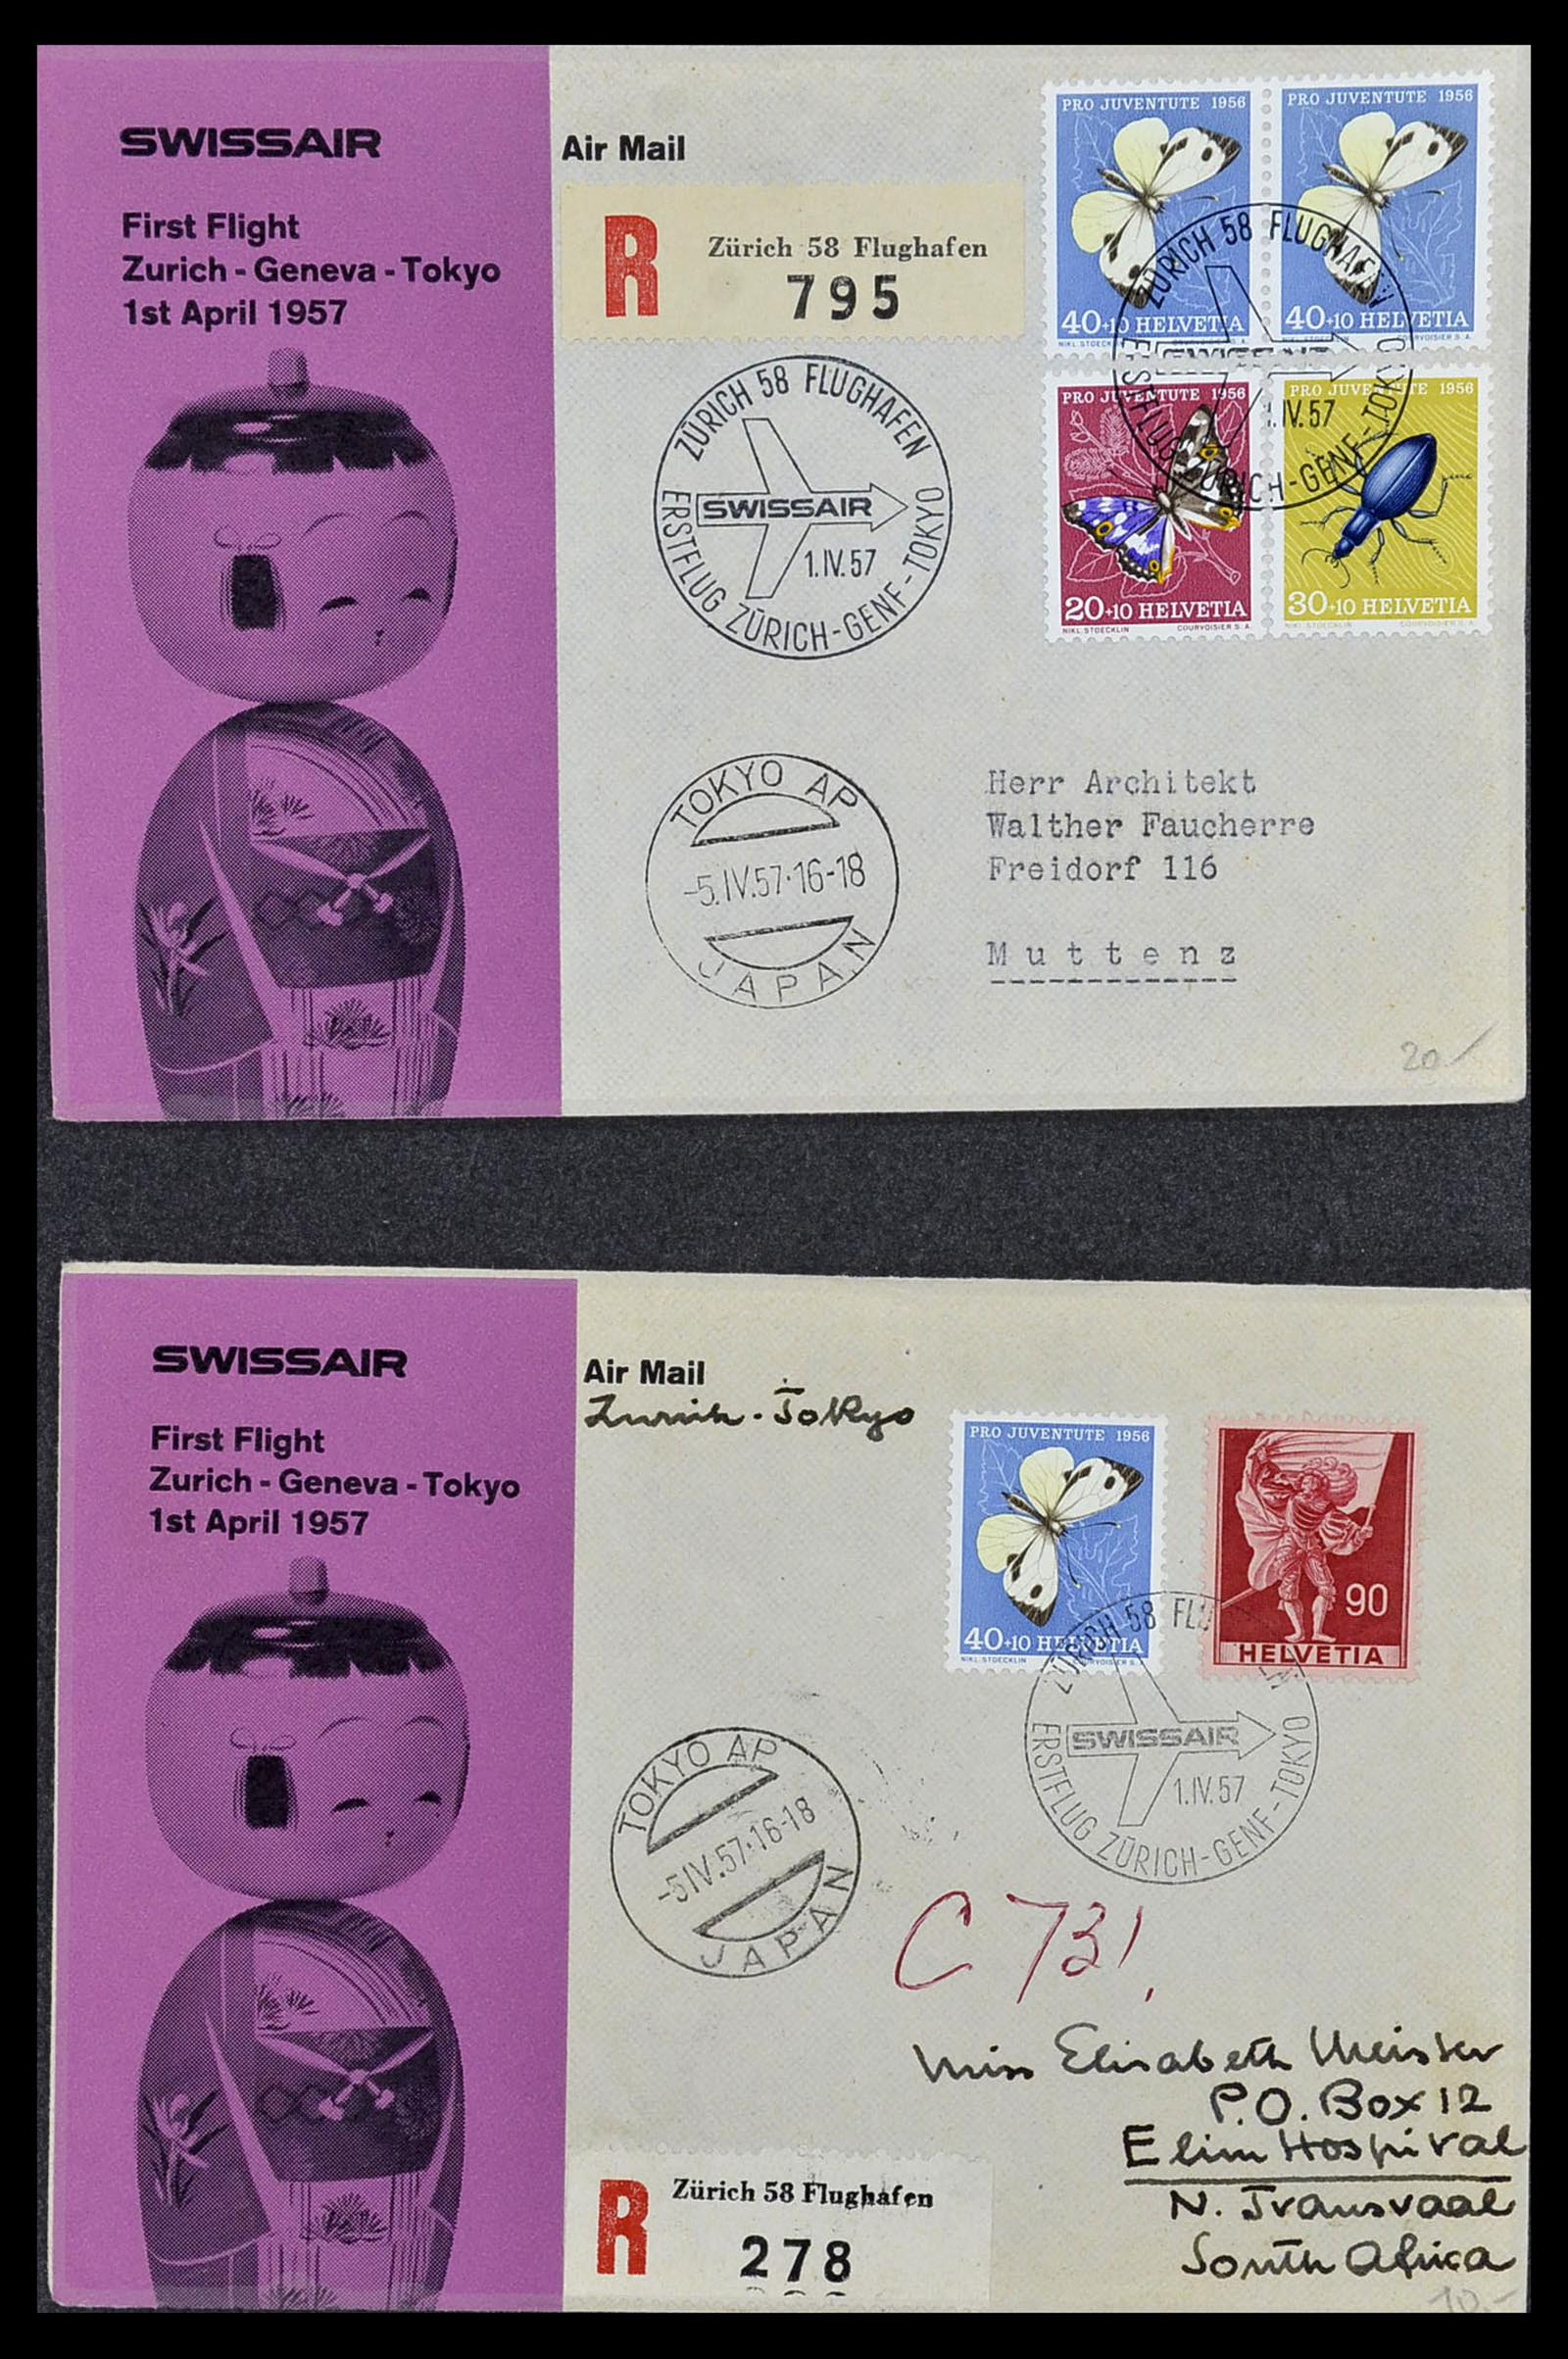 34141 040 - Stamp collection 34141 Switzerland airmail covers 1920-1960.